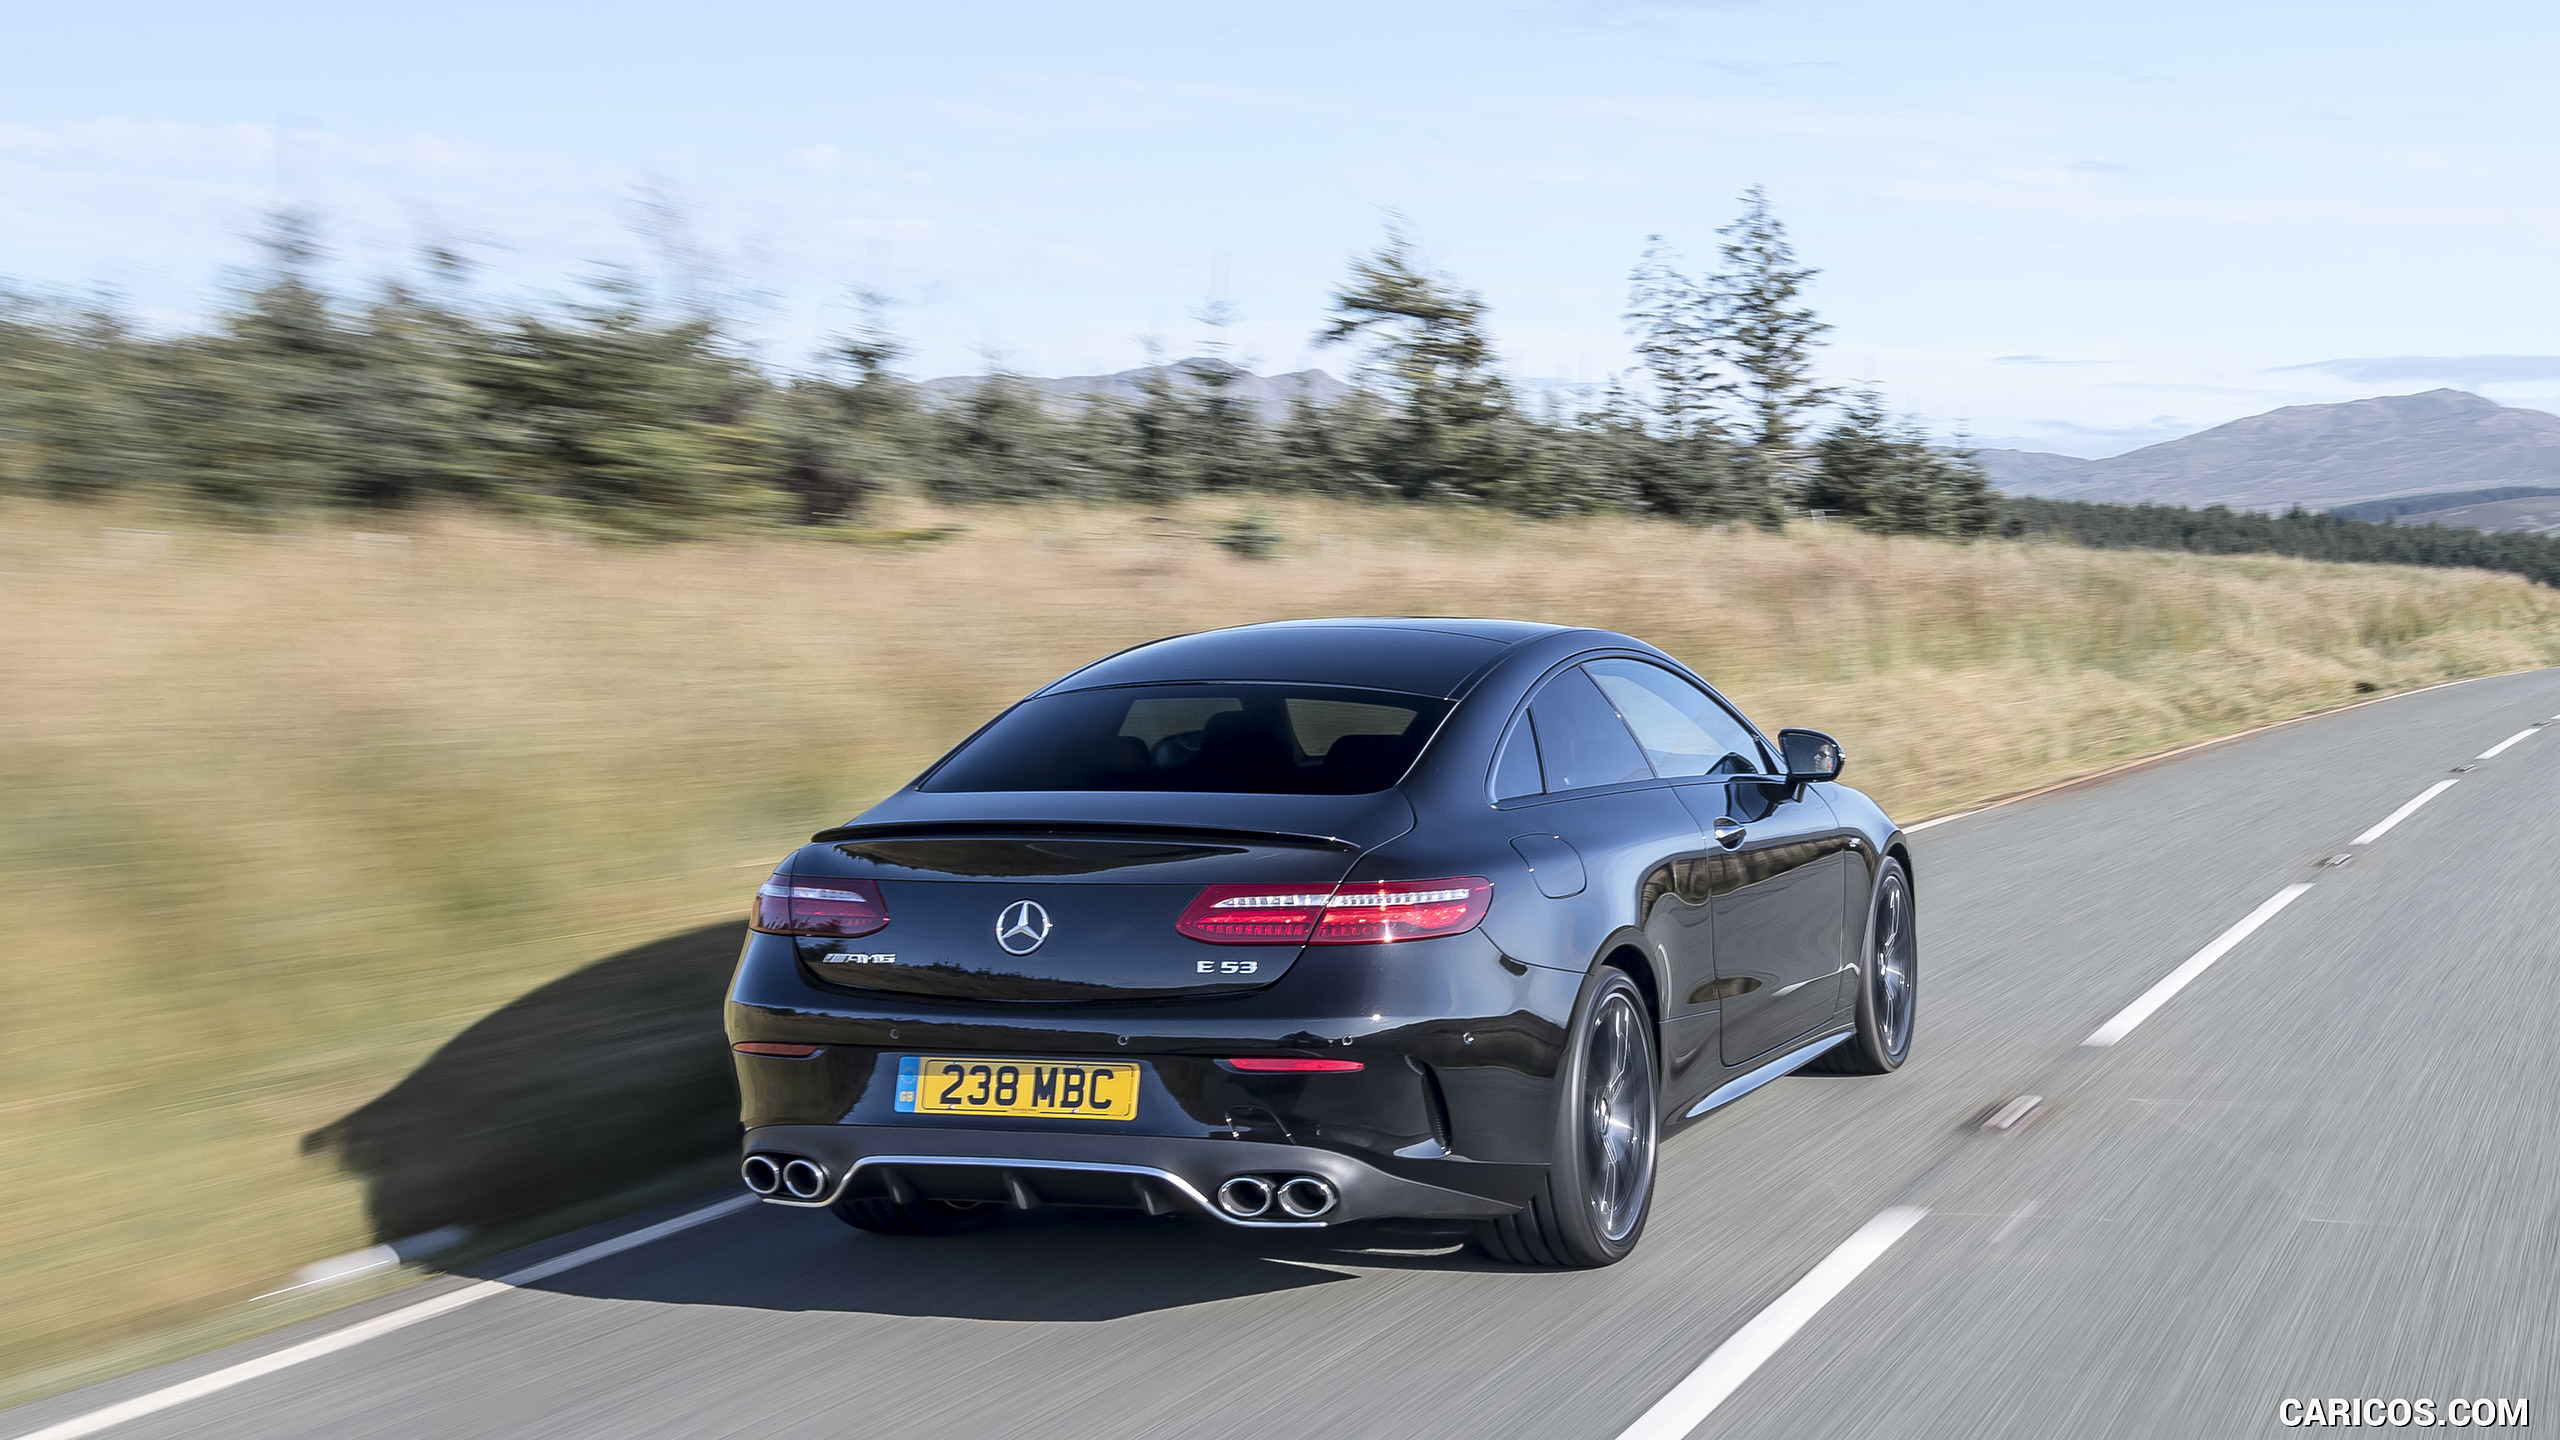 2019 Mercedes-AMG E 53 Coupe (UK-Spec) - Rear, #13 of 166